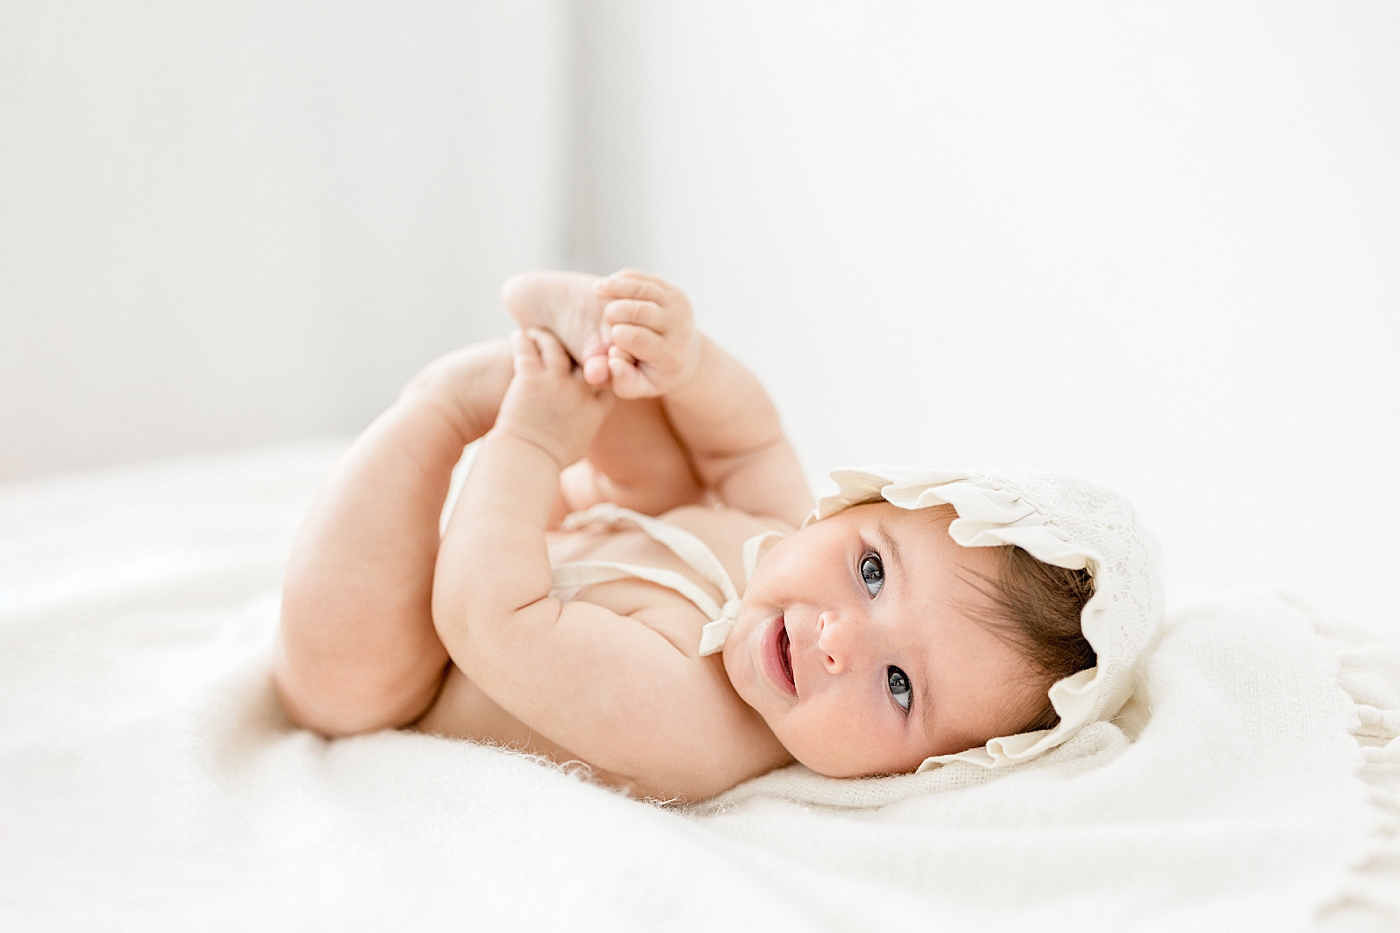 Six month old milestone session with baby girl in a bonnet. Photos by Brittany Elise Photography.